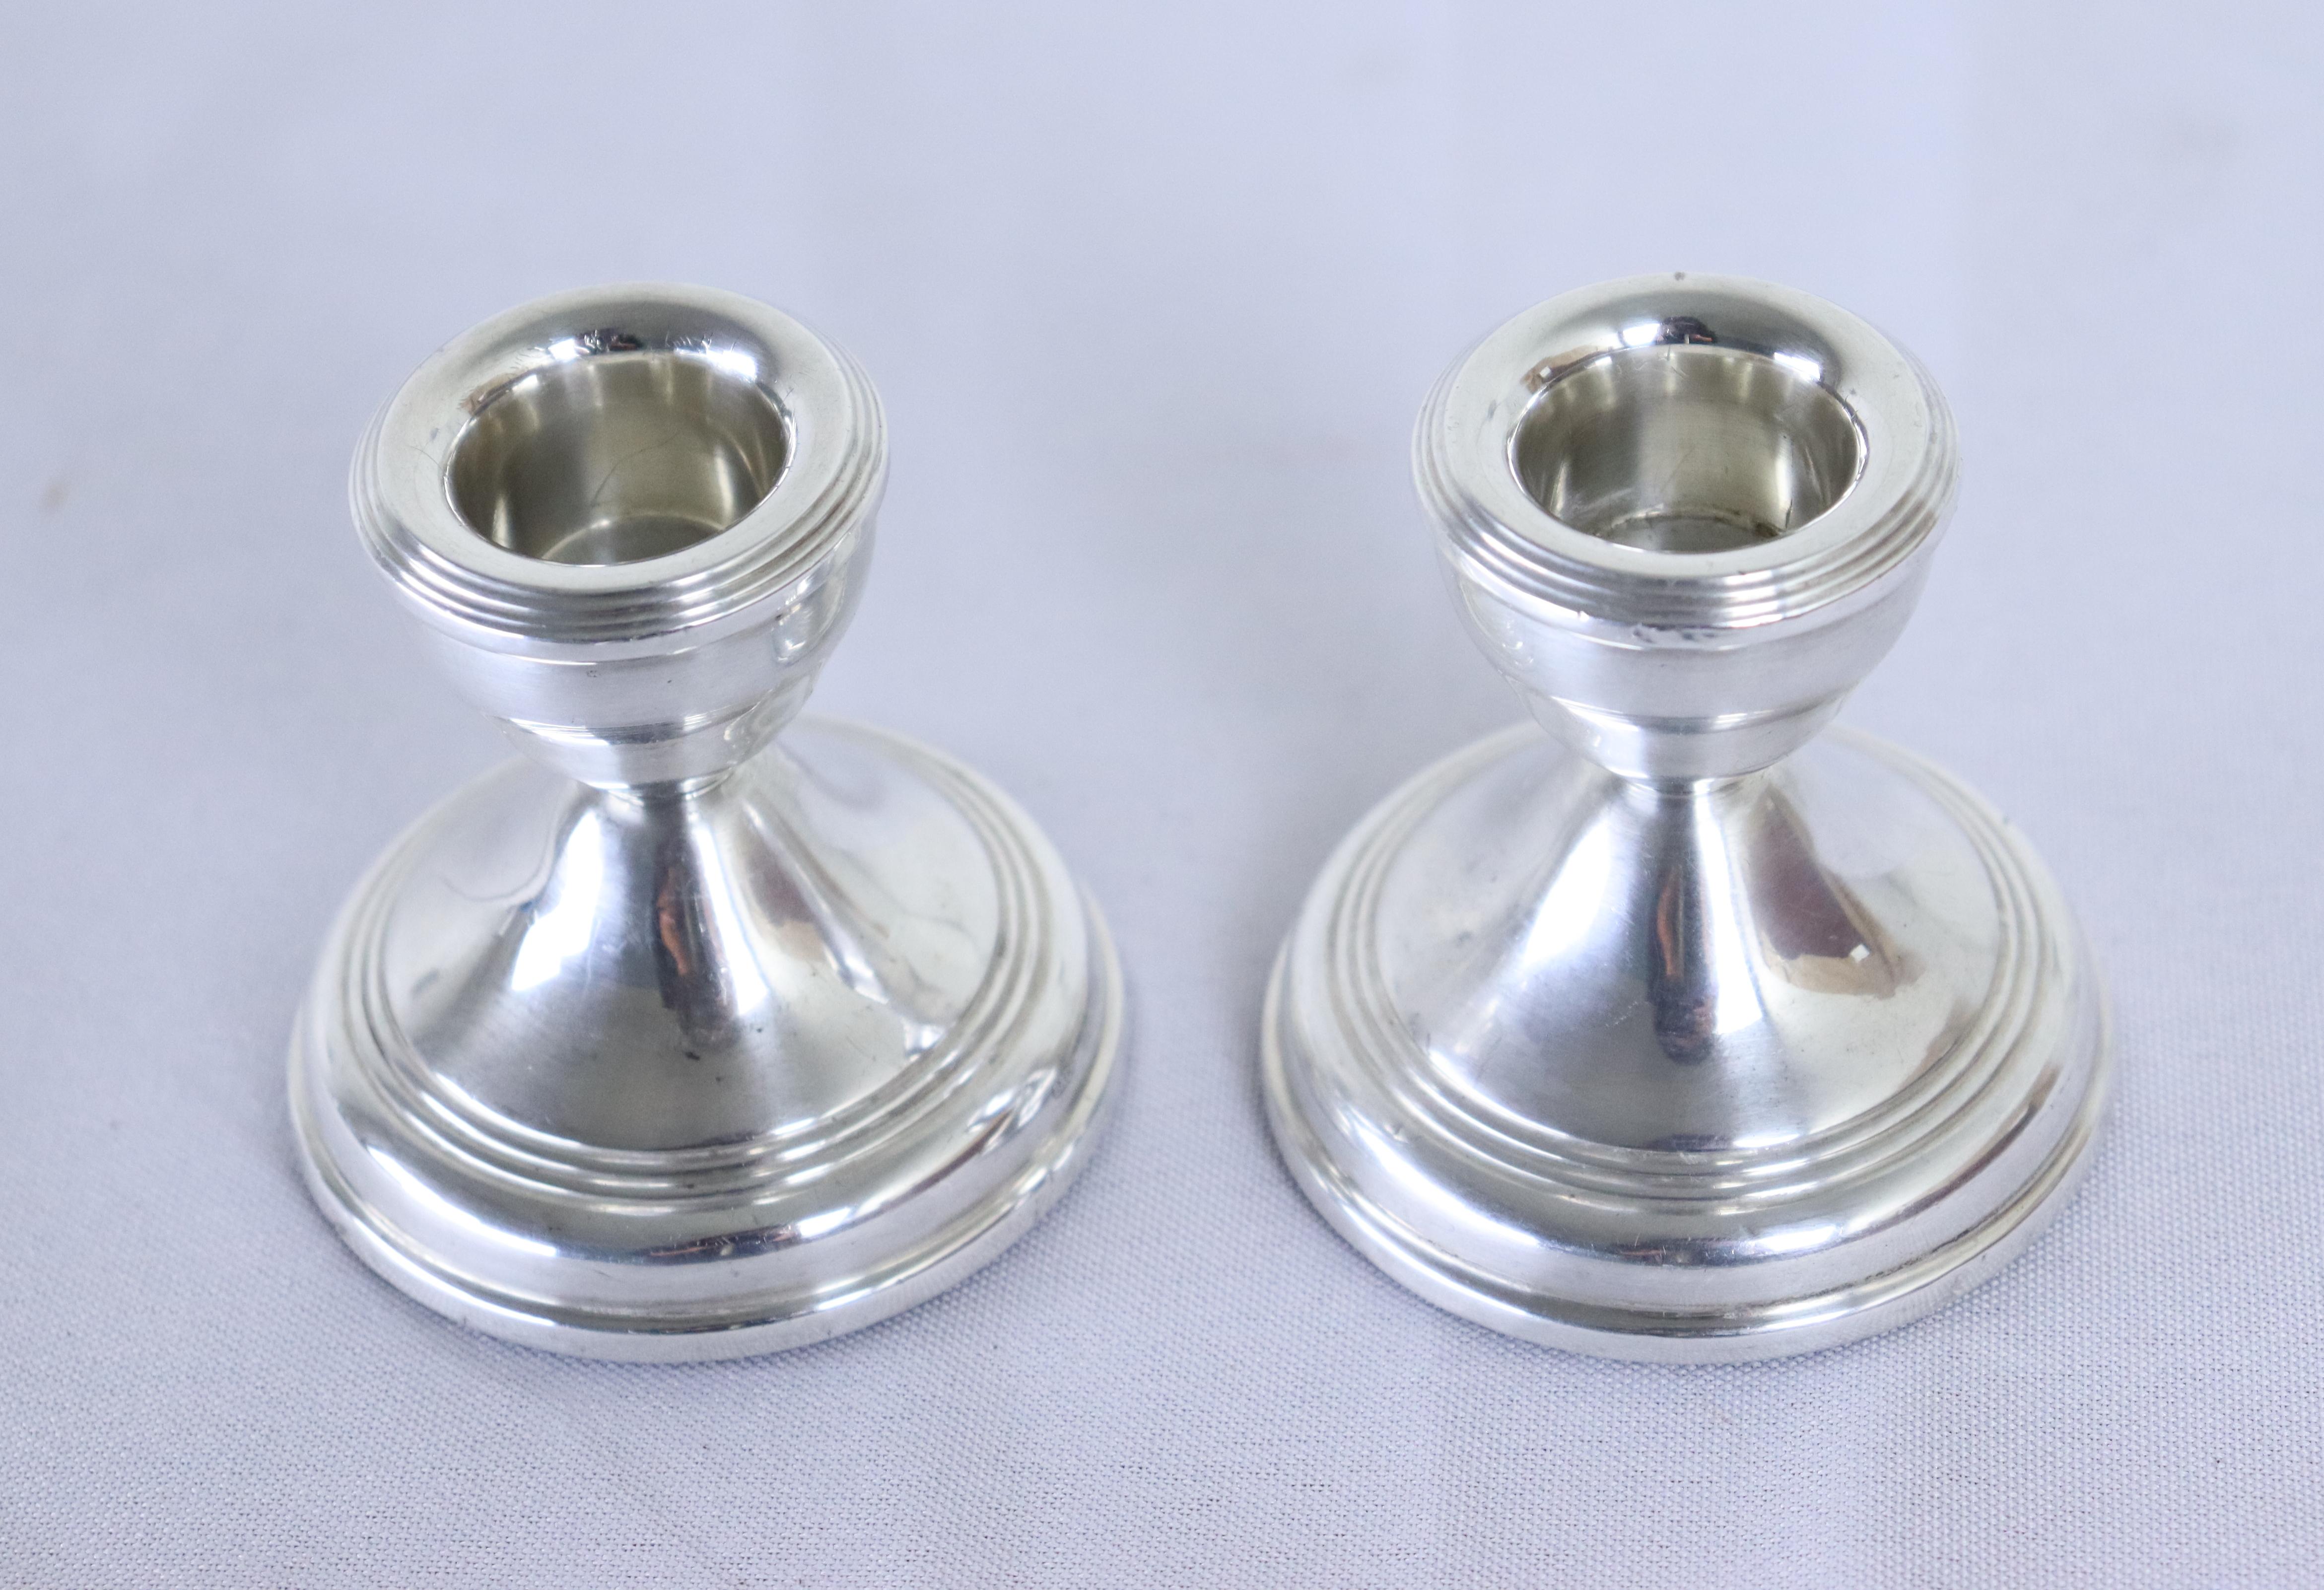 English Pair of Hallmarked Sterling Silver Candlesticks by Broadway & Co., Birmingham For Sale